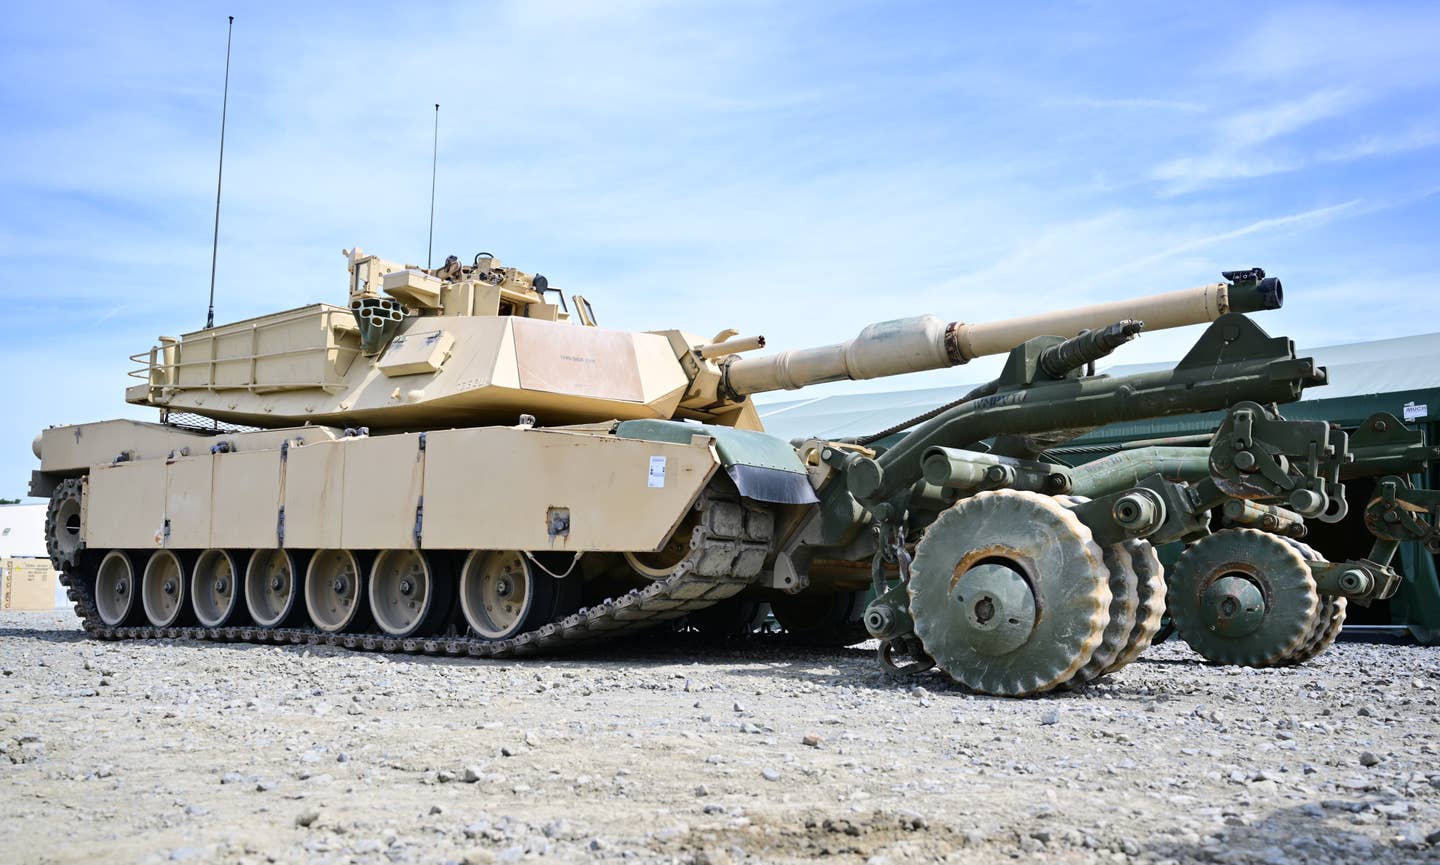 A U.S. Army M1A1 Abrams tank, in the configuration it will be delivered to Ukraine, photographed with its mine roller mounted, is seen here at Grafenwoehr, on July 14, 2023. <em>Photo by Matthias Merz/picture alliance via Getty Images</em>